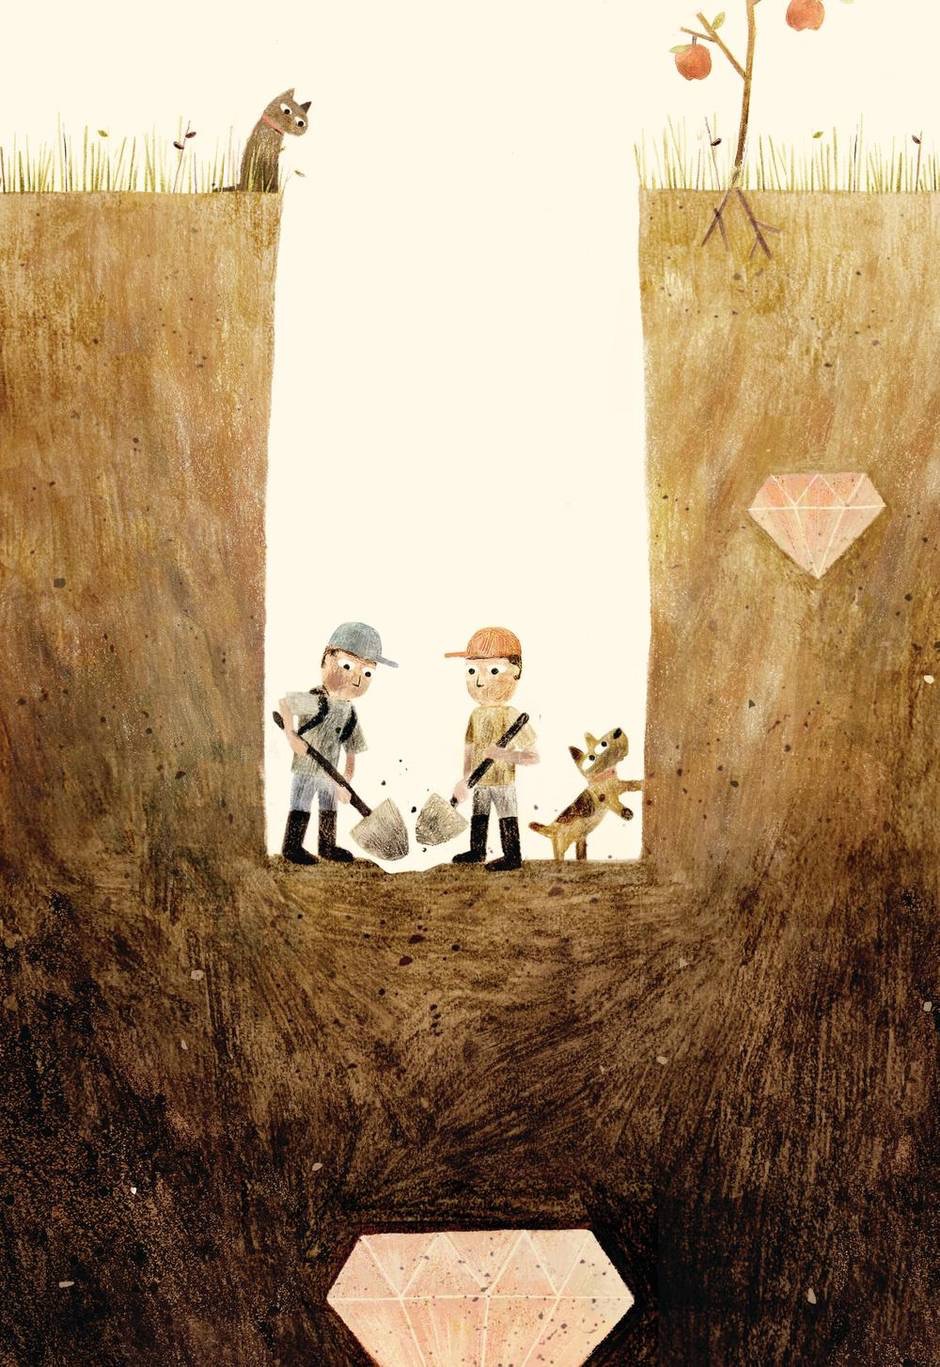 Sam and Dave Dig a Hole by Mac Barnett, illustrated by Jon Klassen